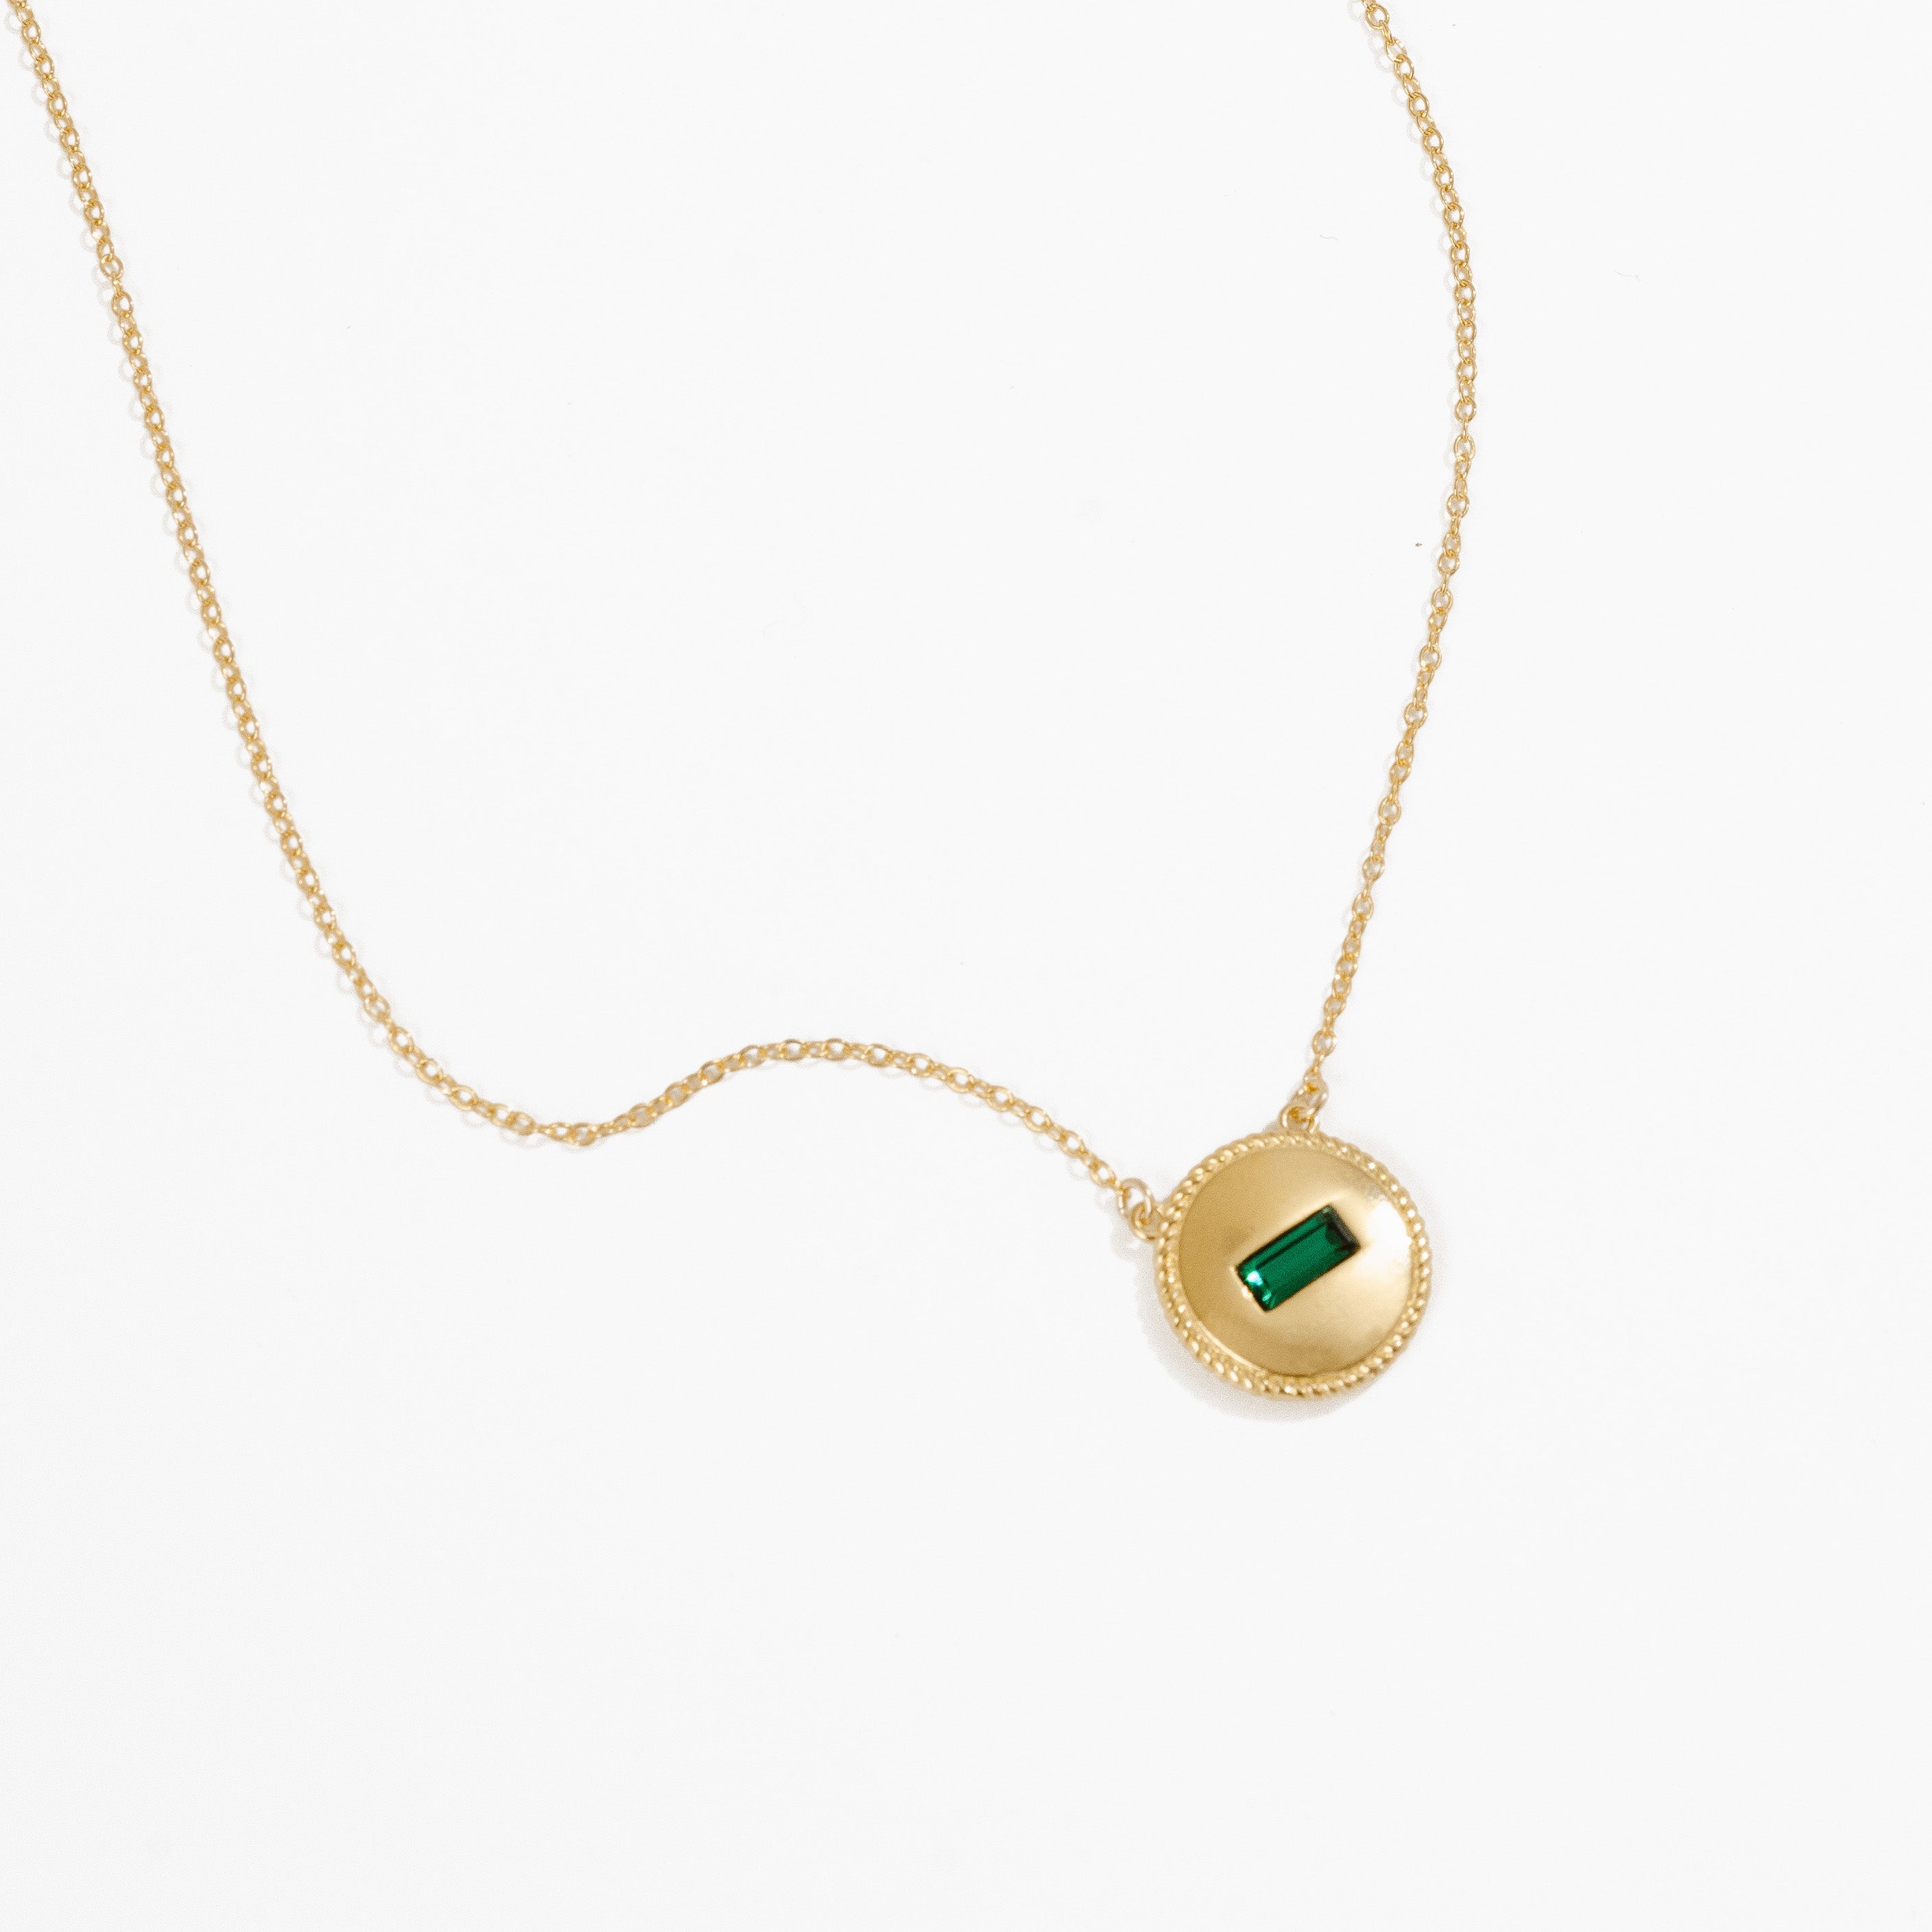 Coin Birthstone Necklace, a Madewell x Katie Dean exclusive, perfect personalized layering necklace